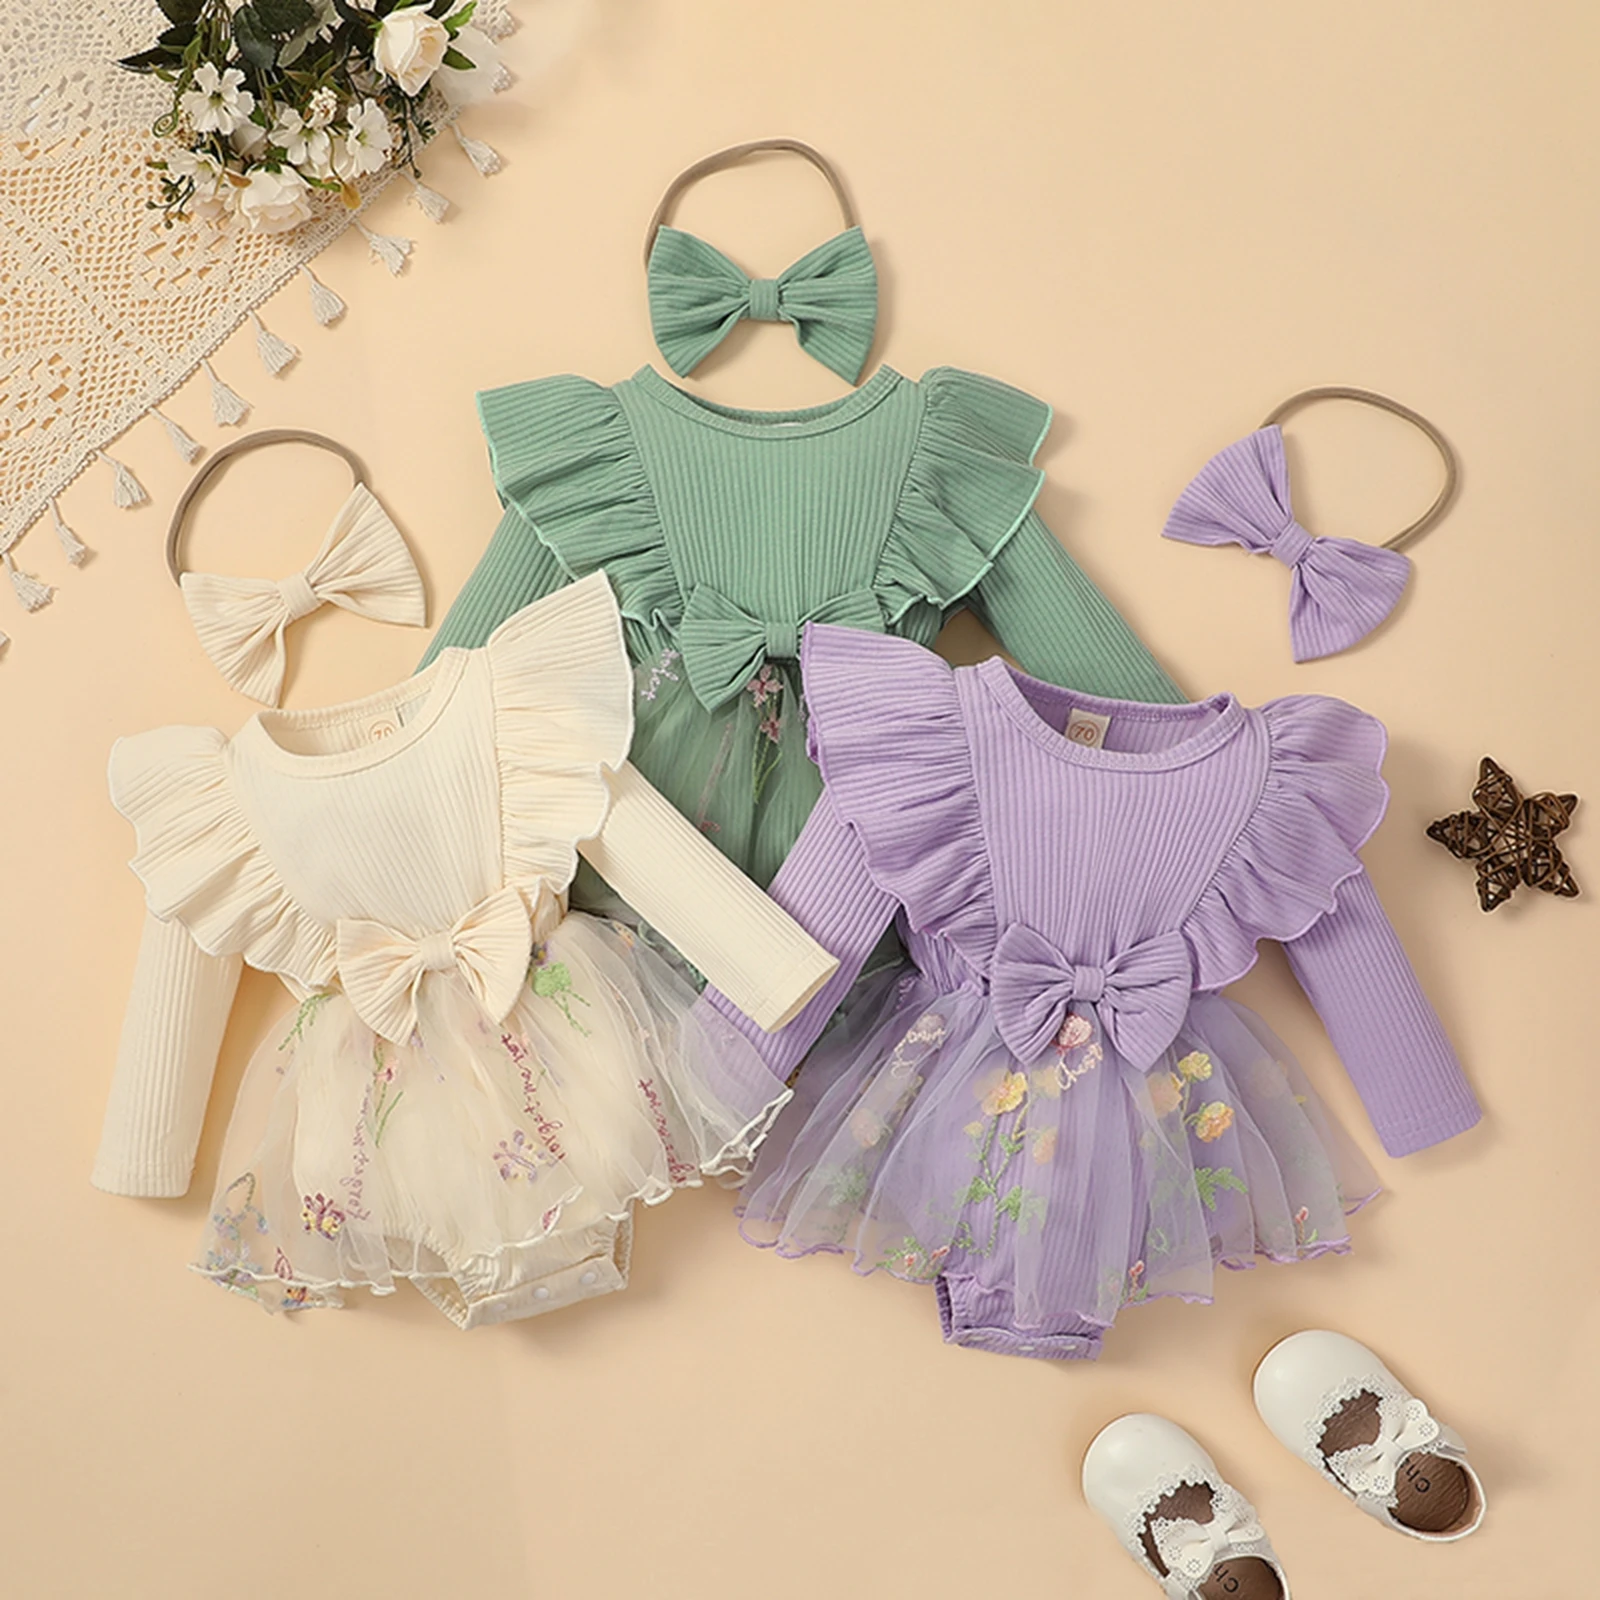 

Infant Baby Girl Romper Dress Rib Knit Butterfly Flower Embroidery Skirt Hem Jumpsuits Bodysuits Clothes with Headband